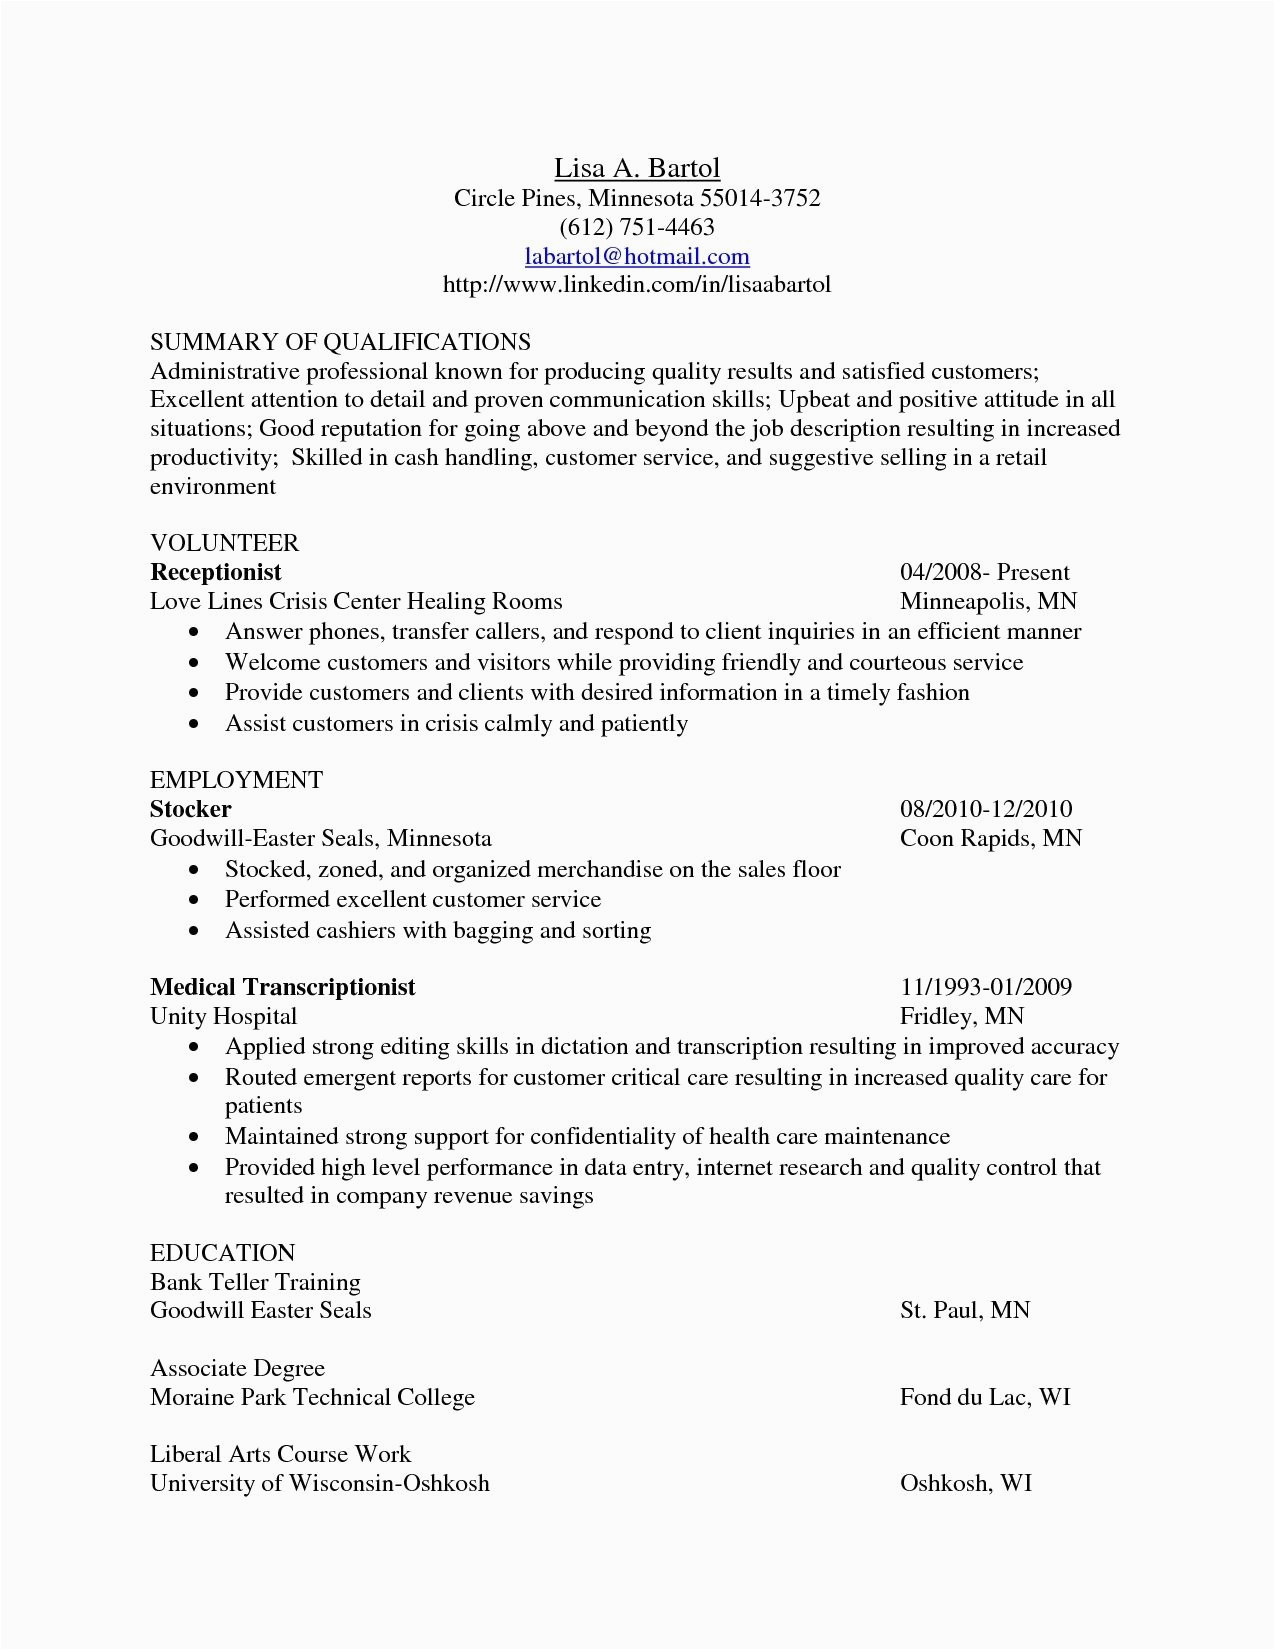 Resume Sample for New No Experience Transcription Sample Cover Letter for Transcriptionist with No Experience